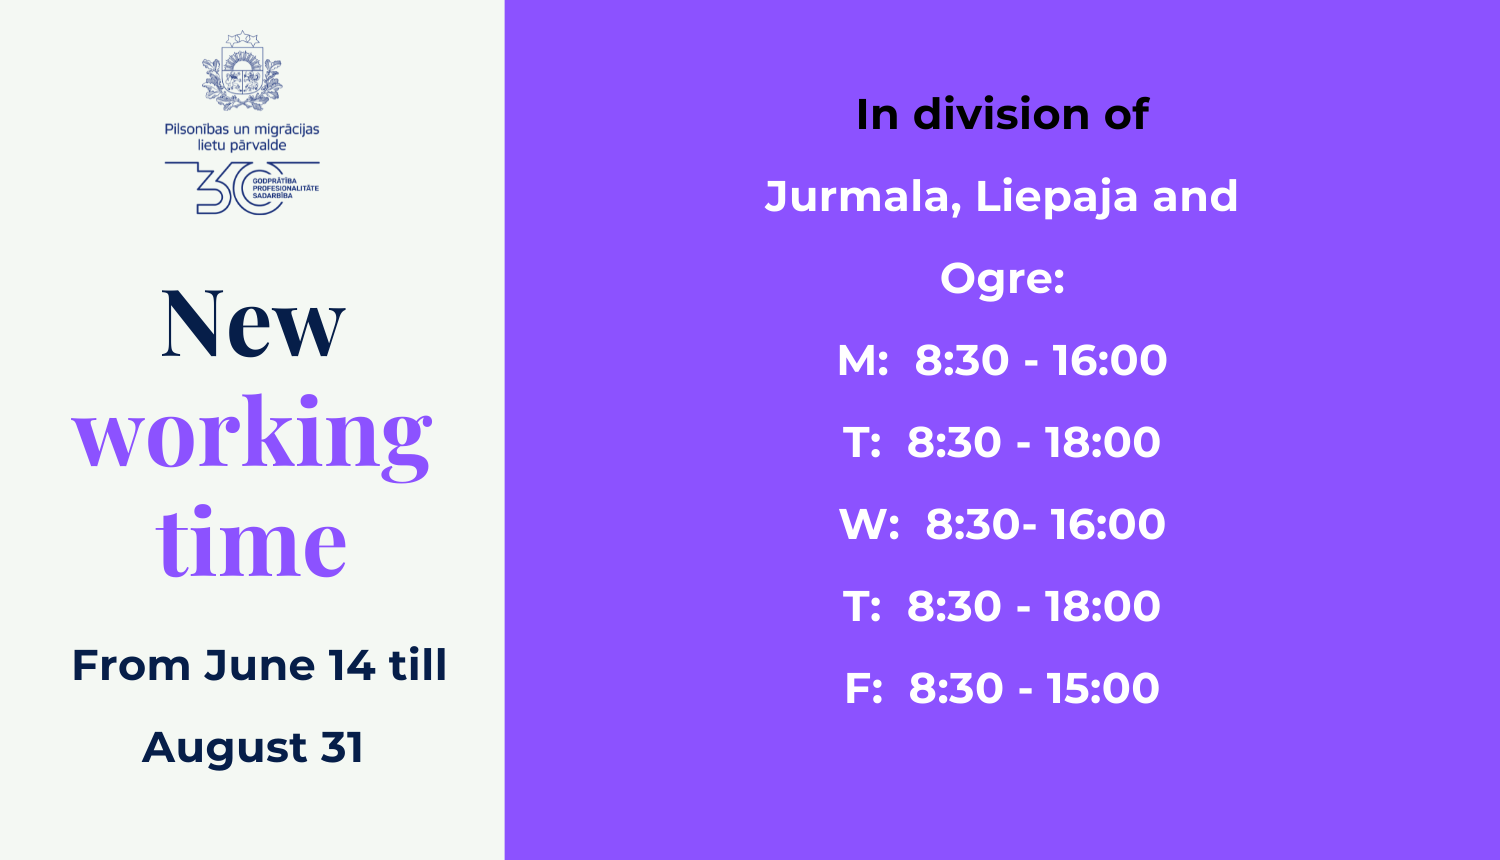 New working time In division of Jurmala, Liepaja and Ogre